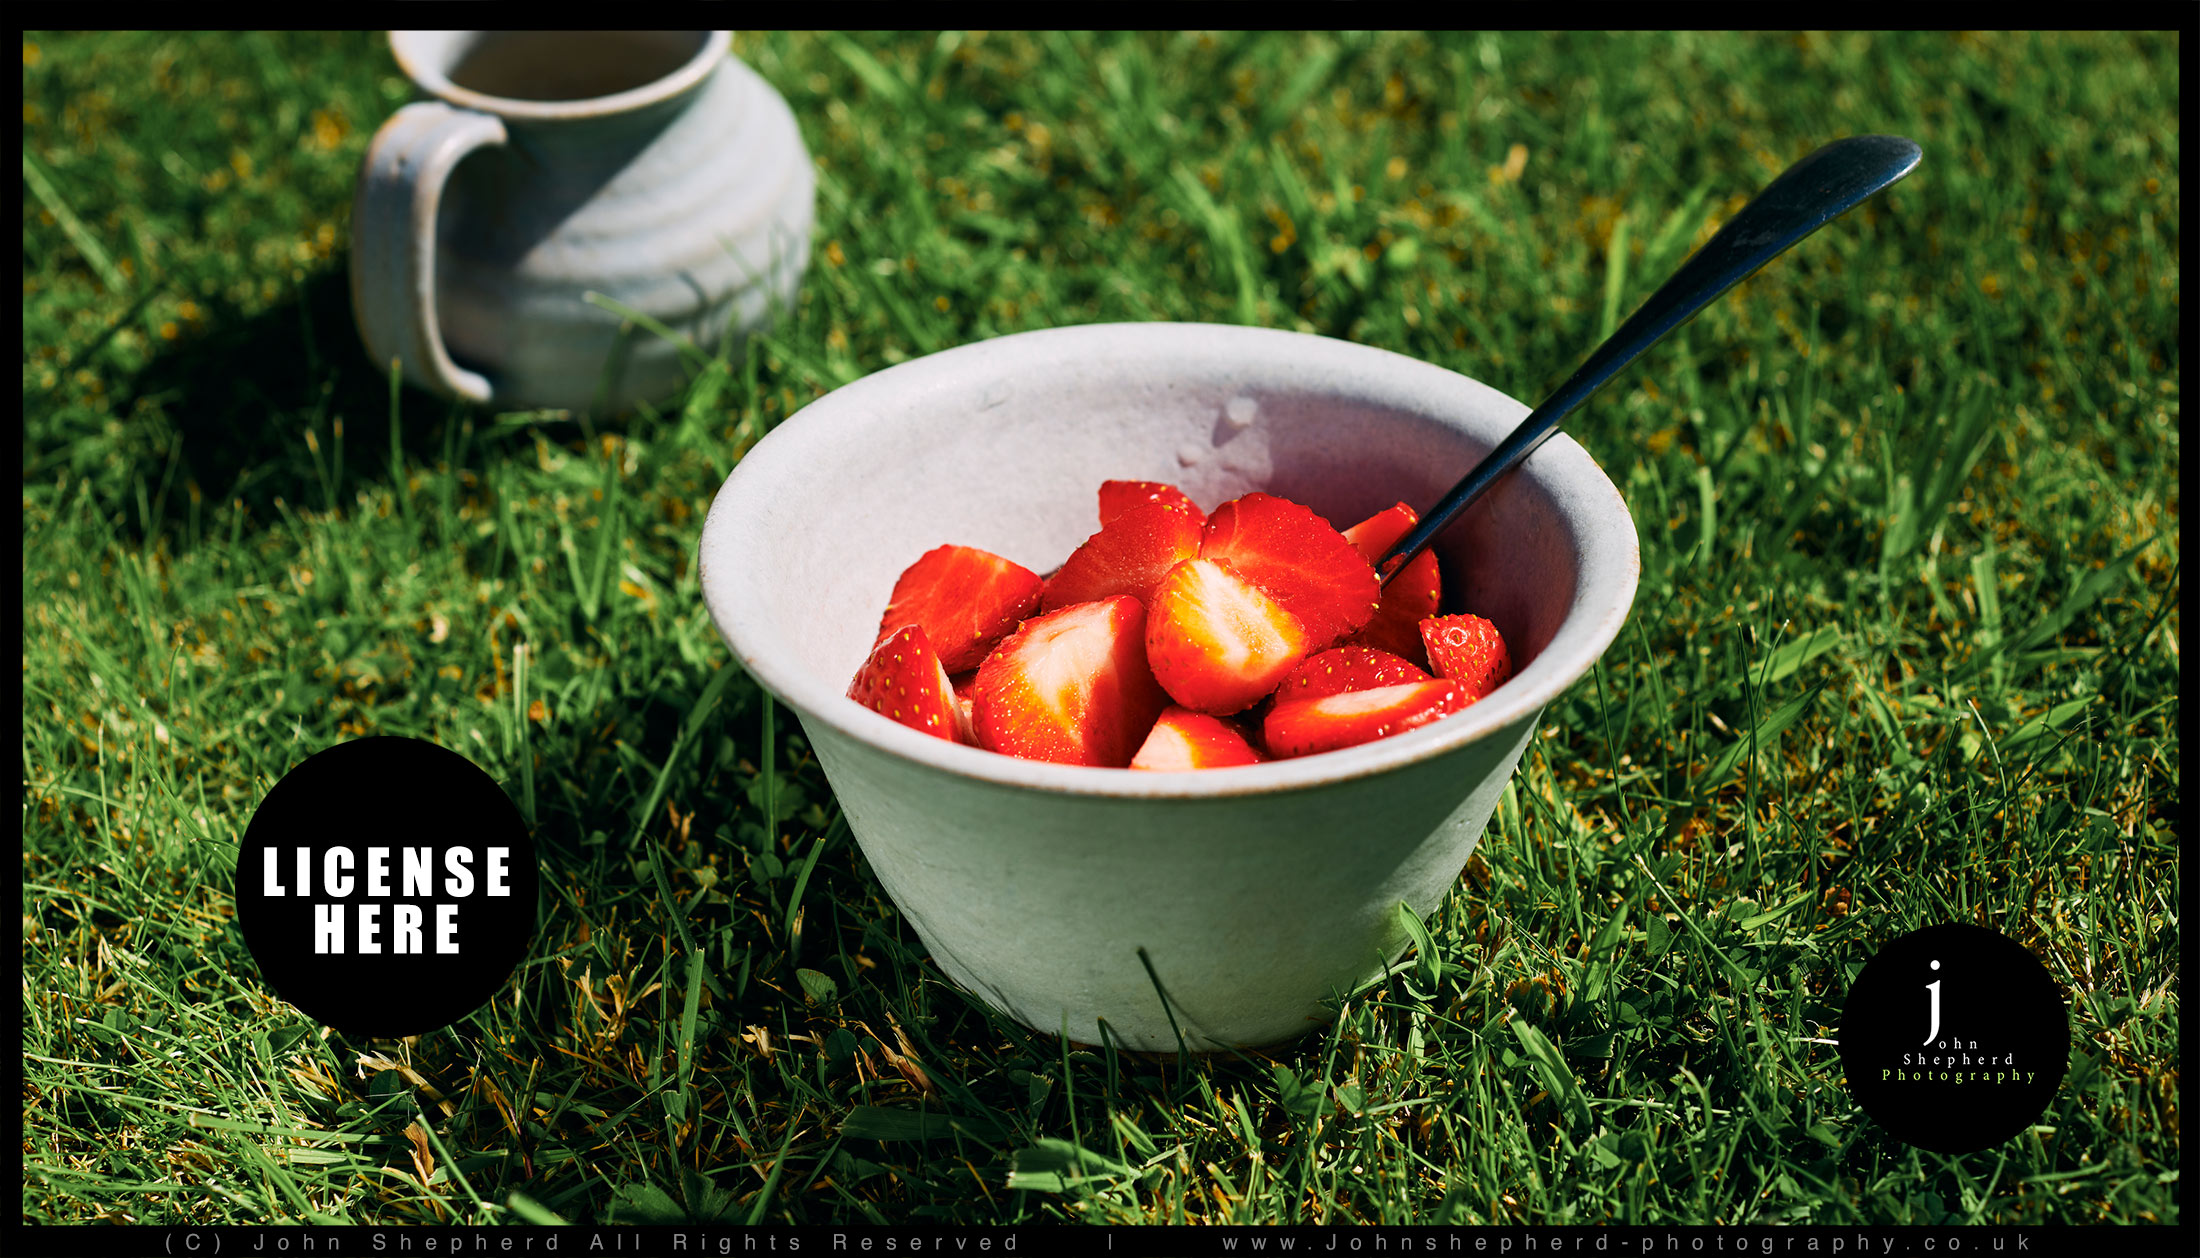 Bowl of strawberries on a summer Lawn.